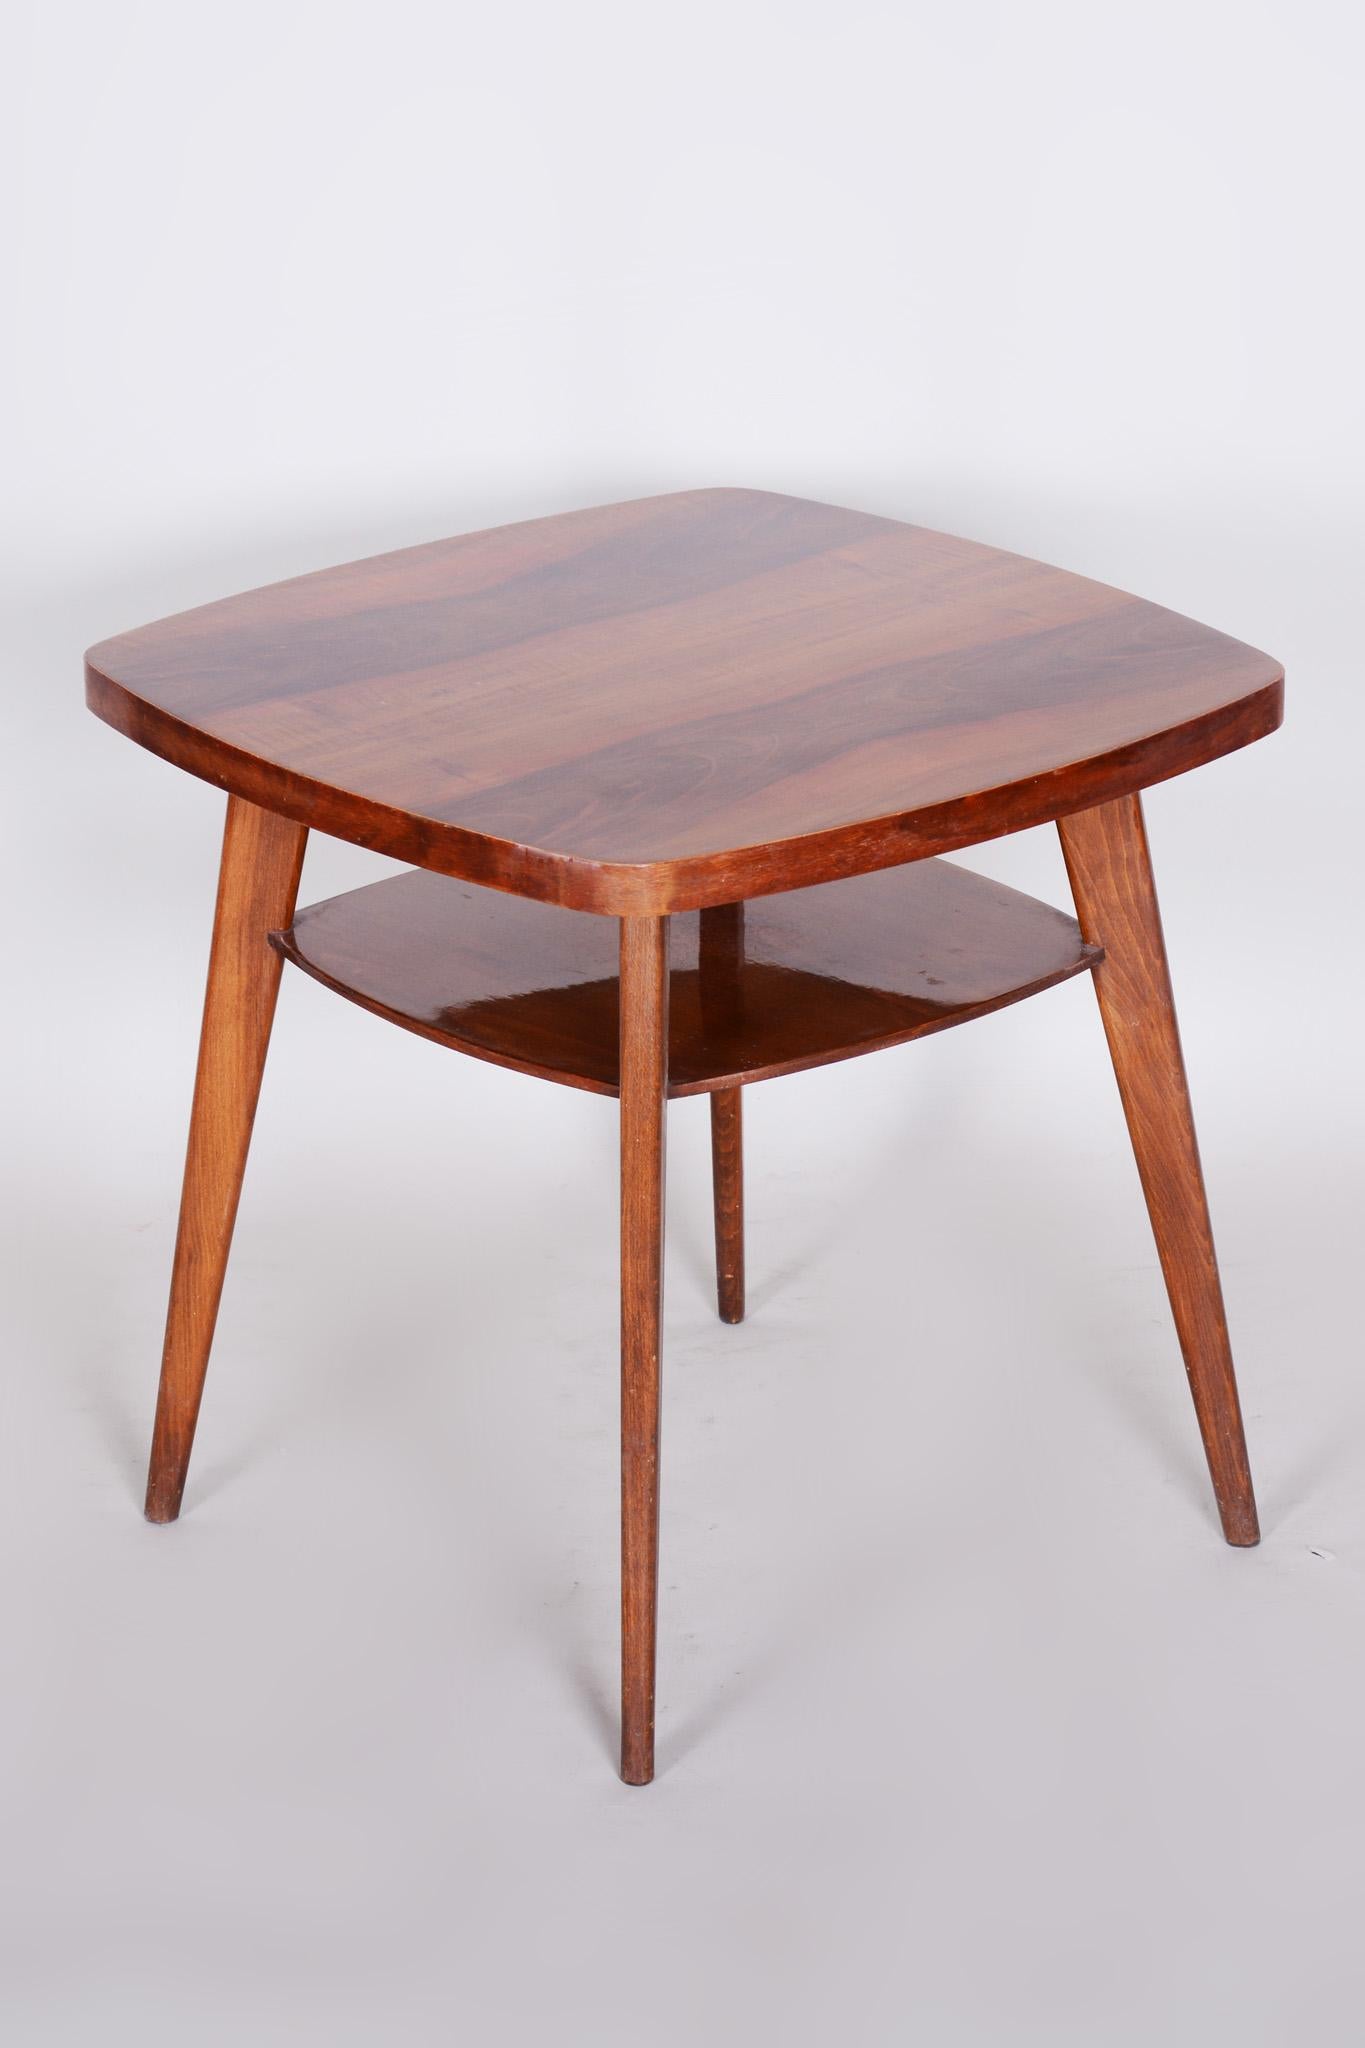 Mid-20th Century Walnut Table, Czech Midcentury, Preserved Original Condition, 1950s For Sale